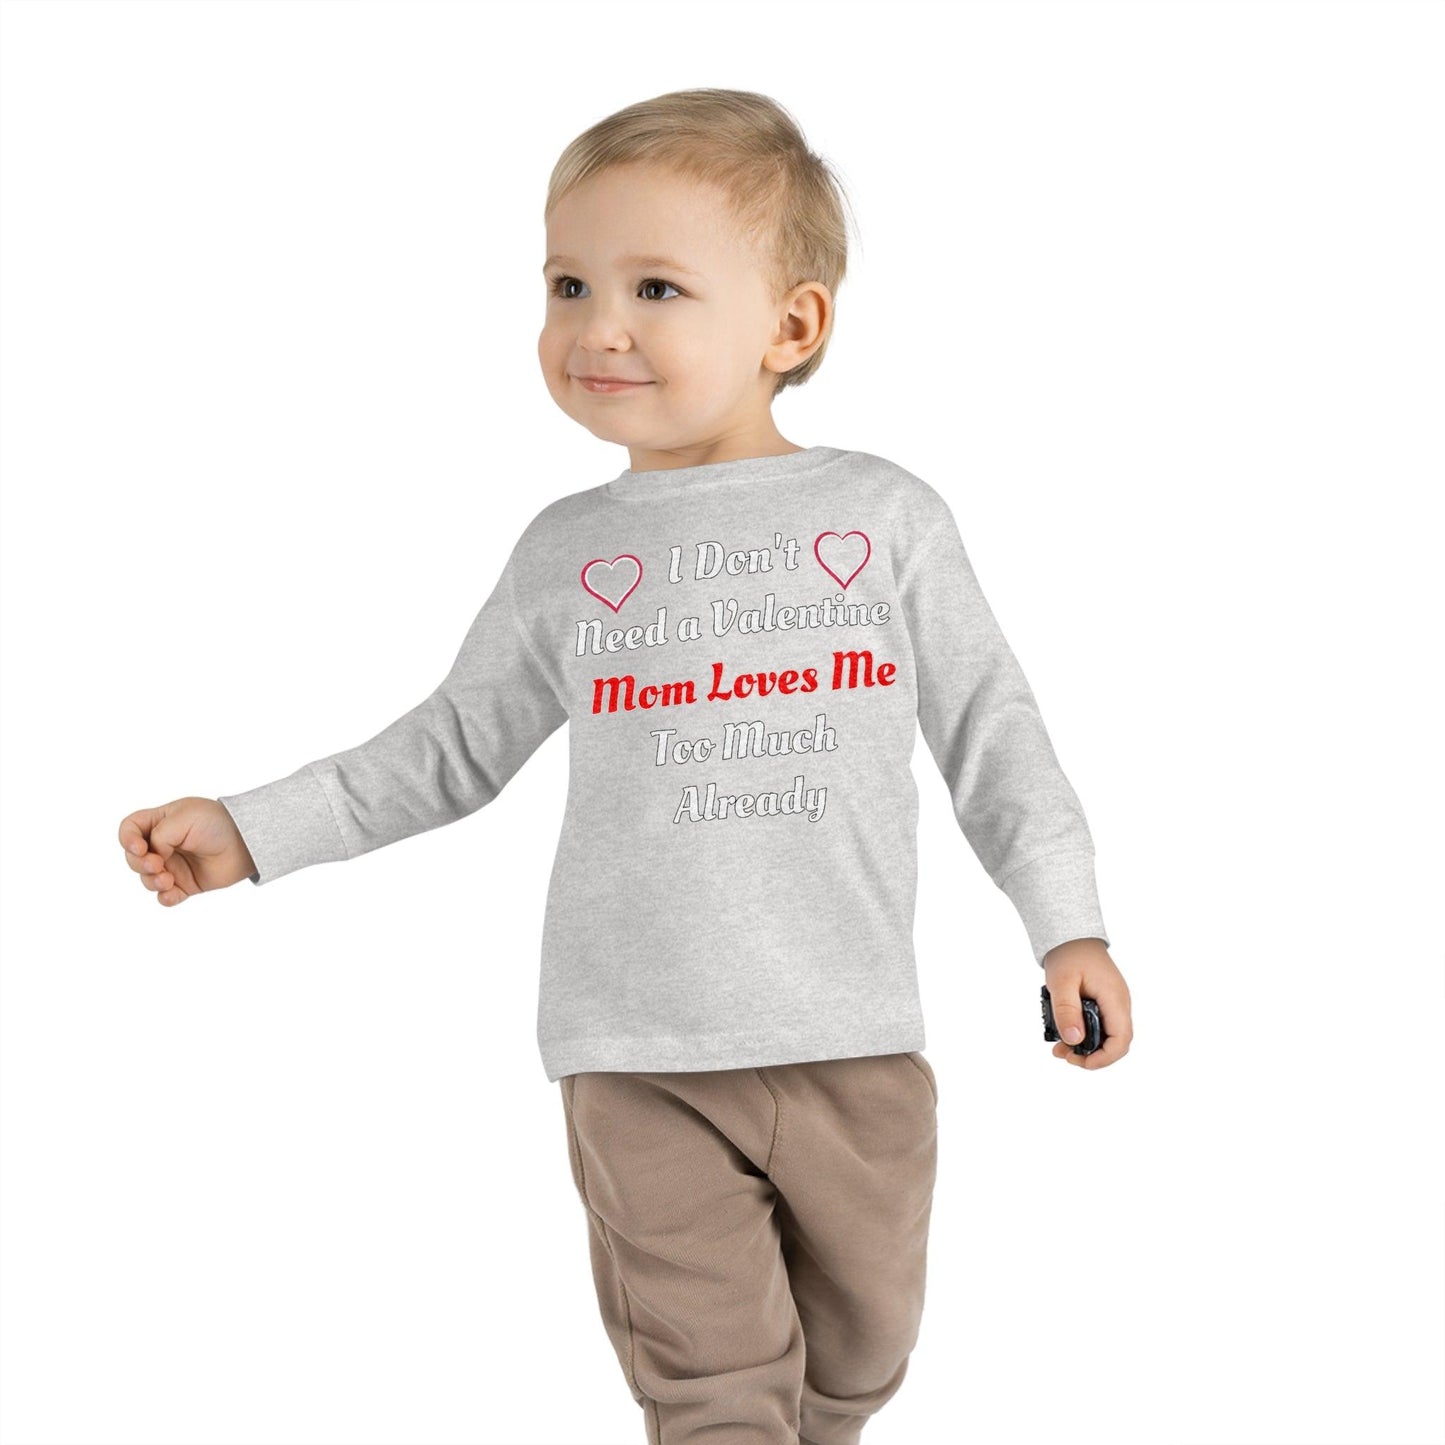 I don't need a valentine mom loves me too much already Toddler Long Sleeve Tee